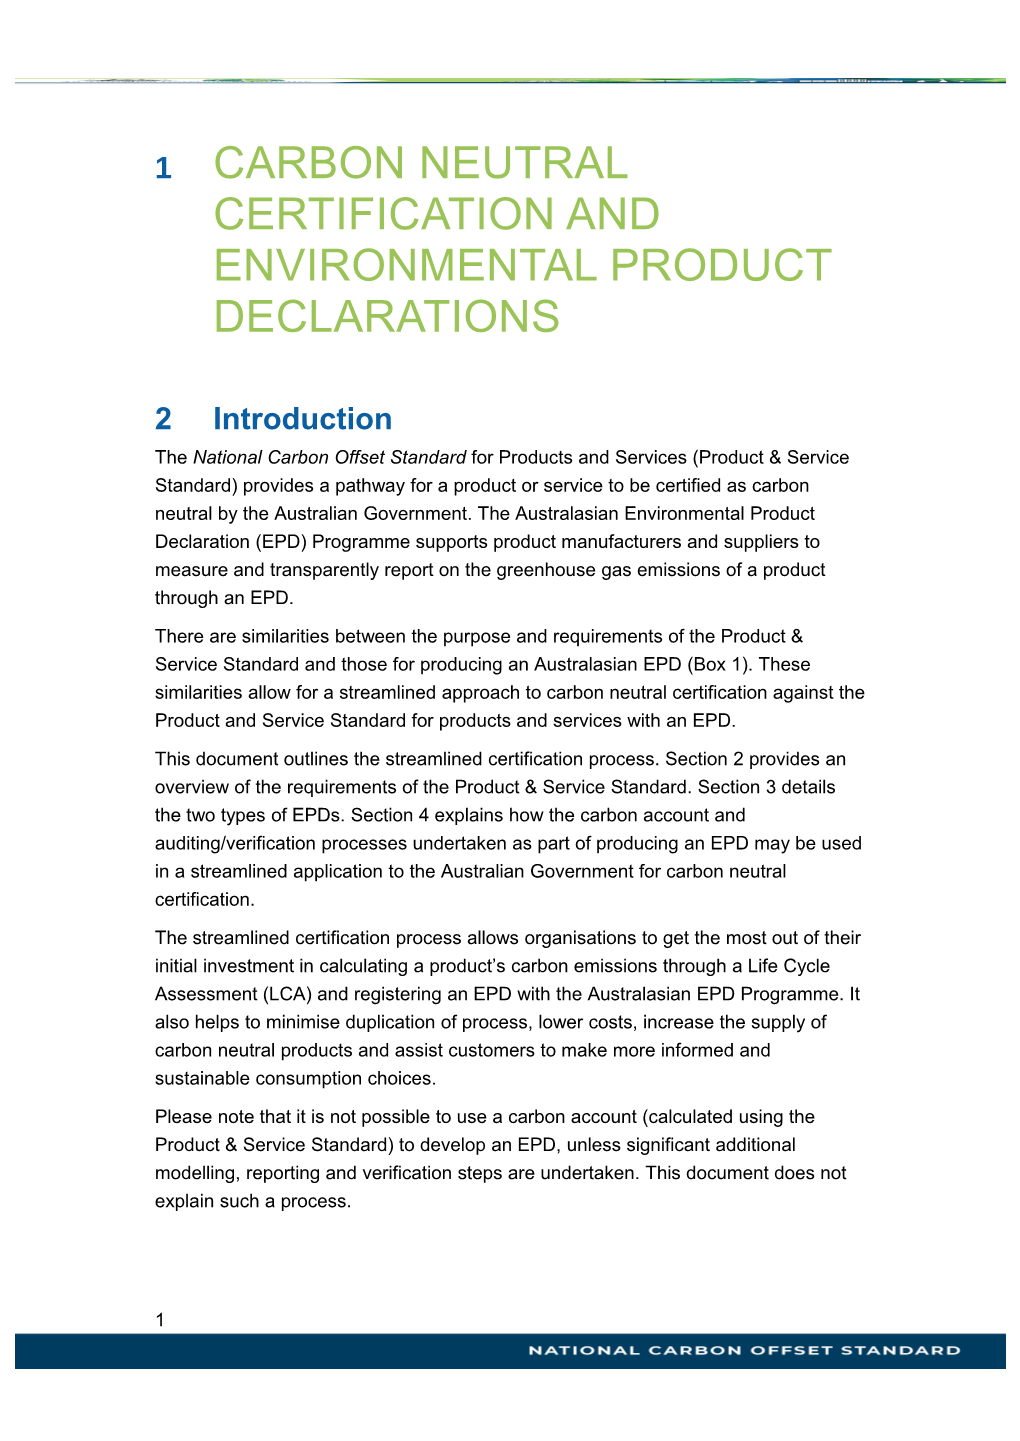 Carbon Neutral Certification and Environmental Product Declarations